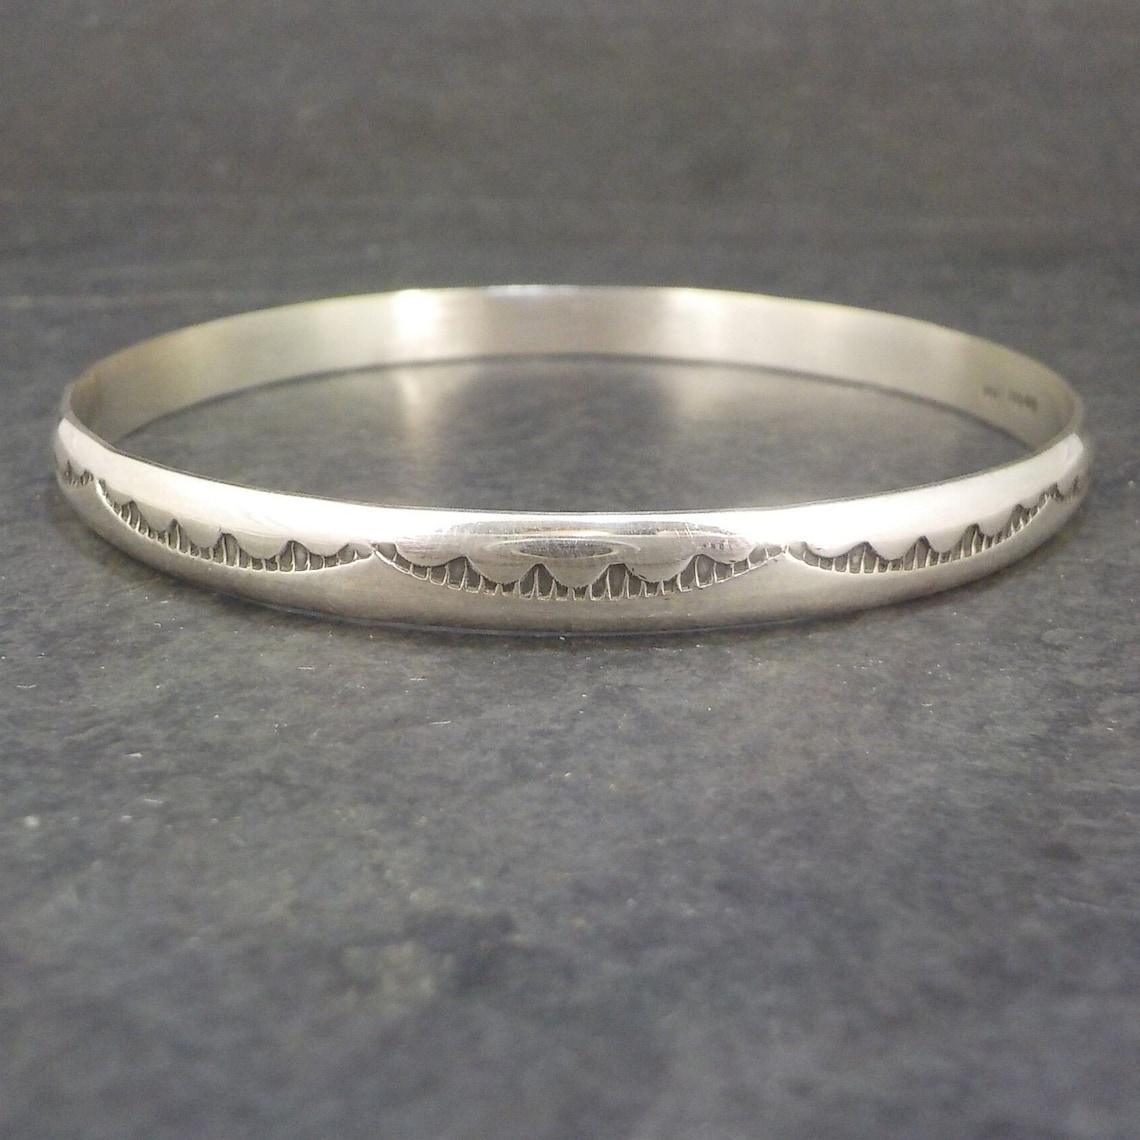 This beautiful Southwestern bangle bracelet is sterling silver.
It is a creation of the Navajo, Tahe family.

Measurements: 6mm wide - Inner circumference of 7 1/2 inches - Inner diameter of 2 1/2 inches
Weight: 17.7 grams

Marks: Sterling,